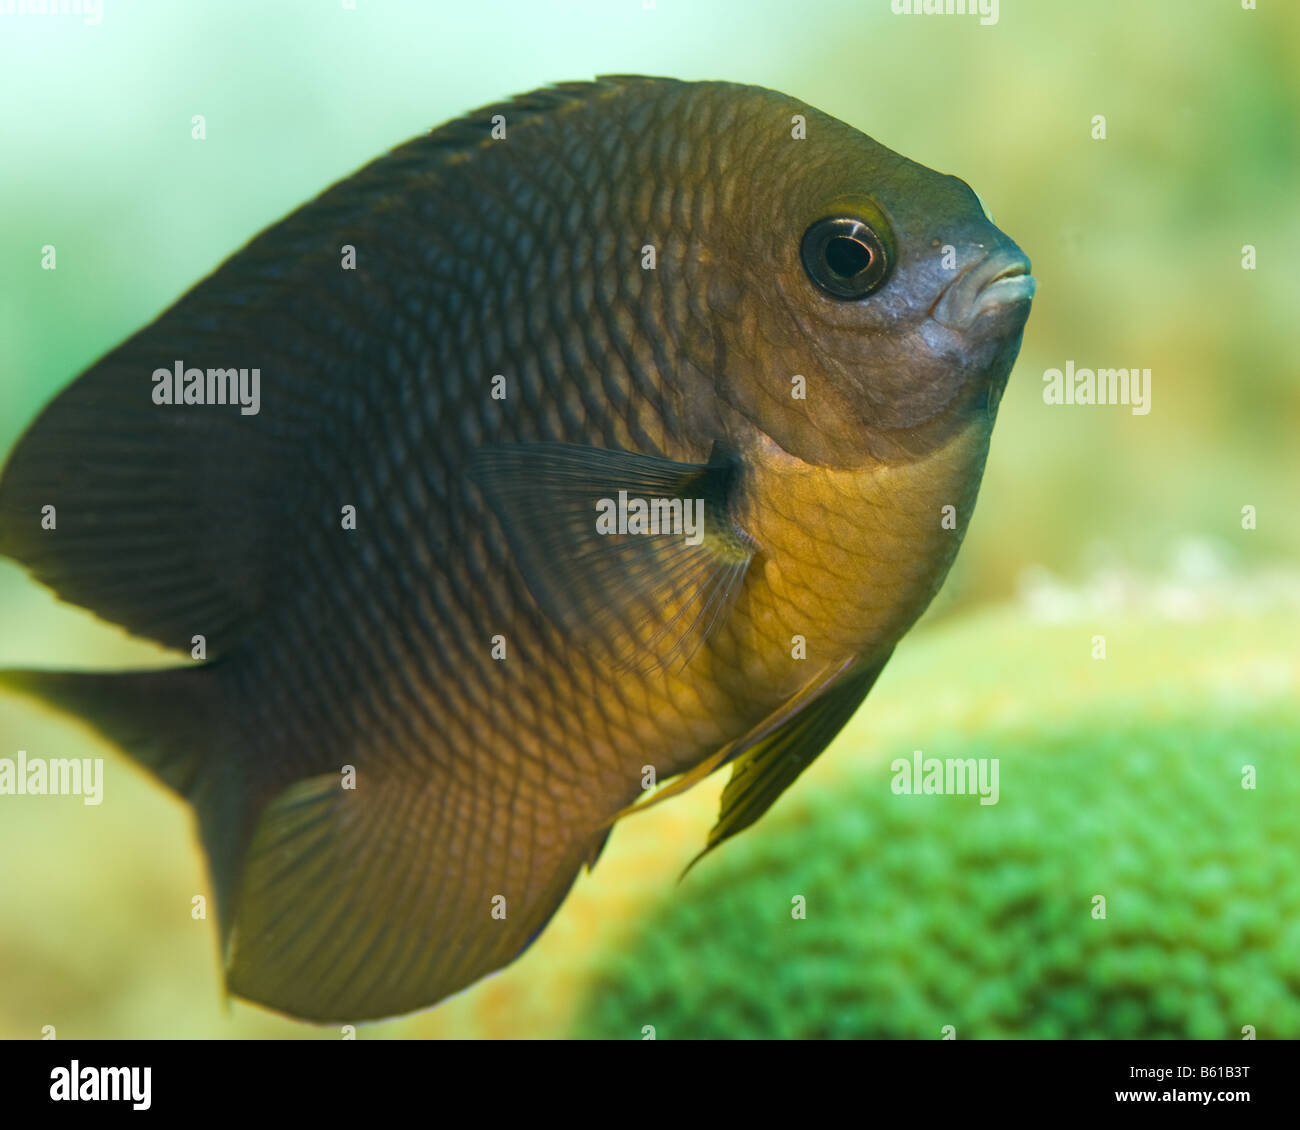 A territorial Threespot Damselfish polices its' territory against the photographer. Stock Photo